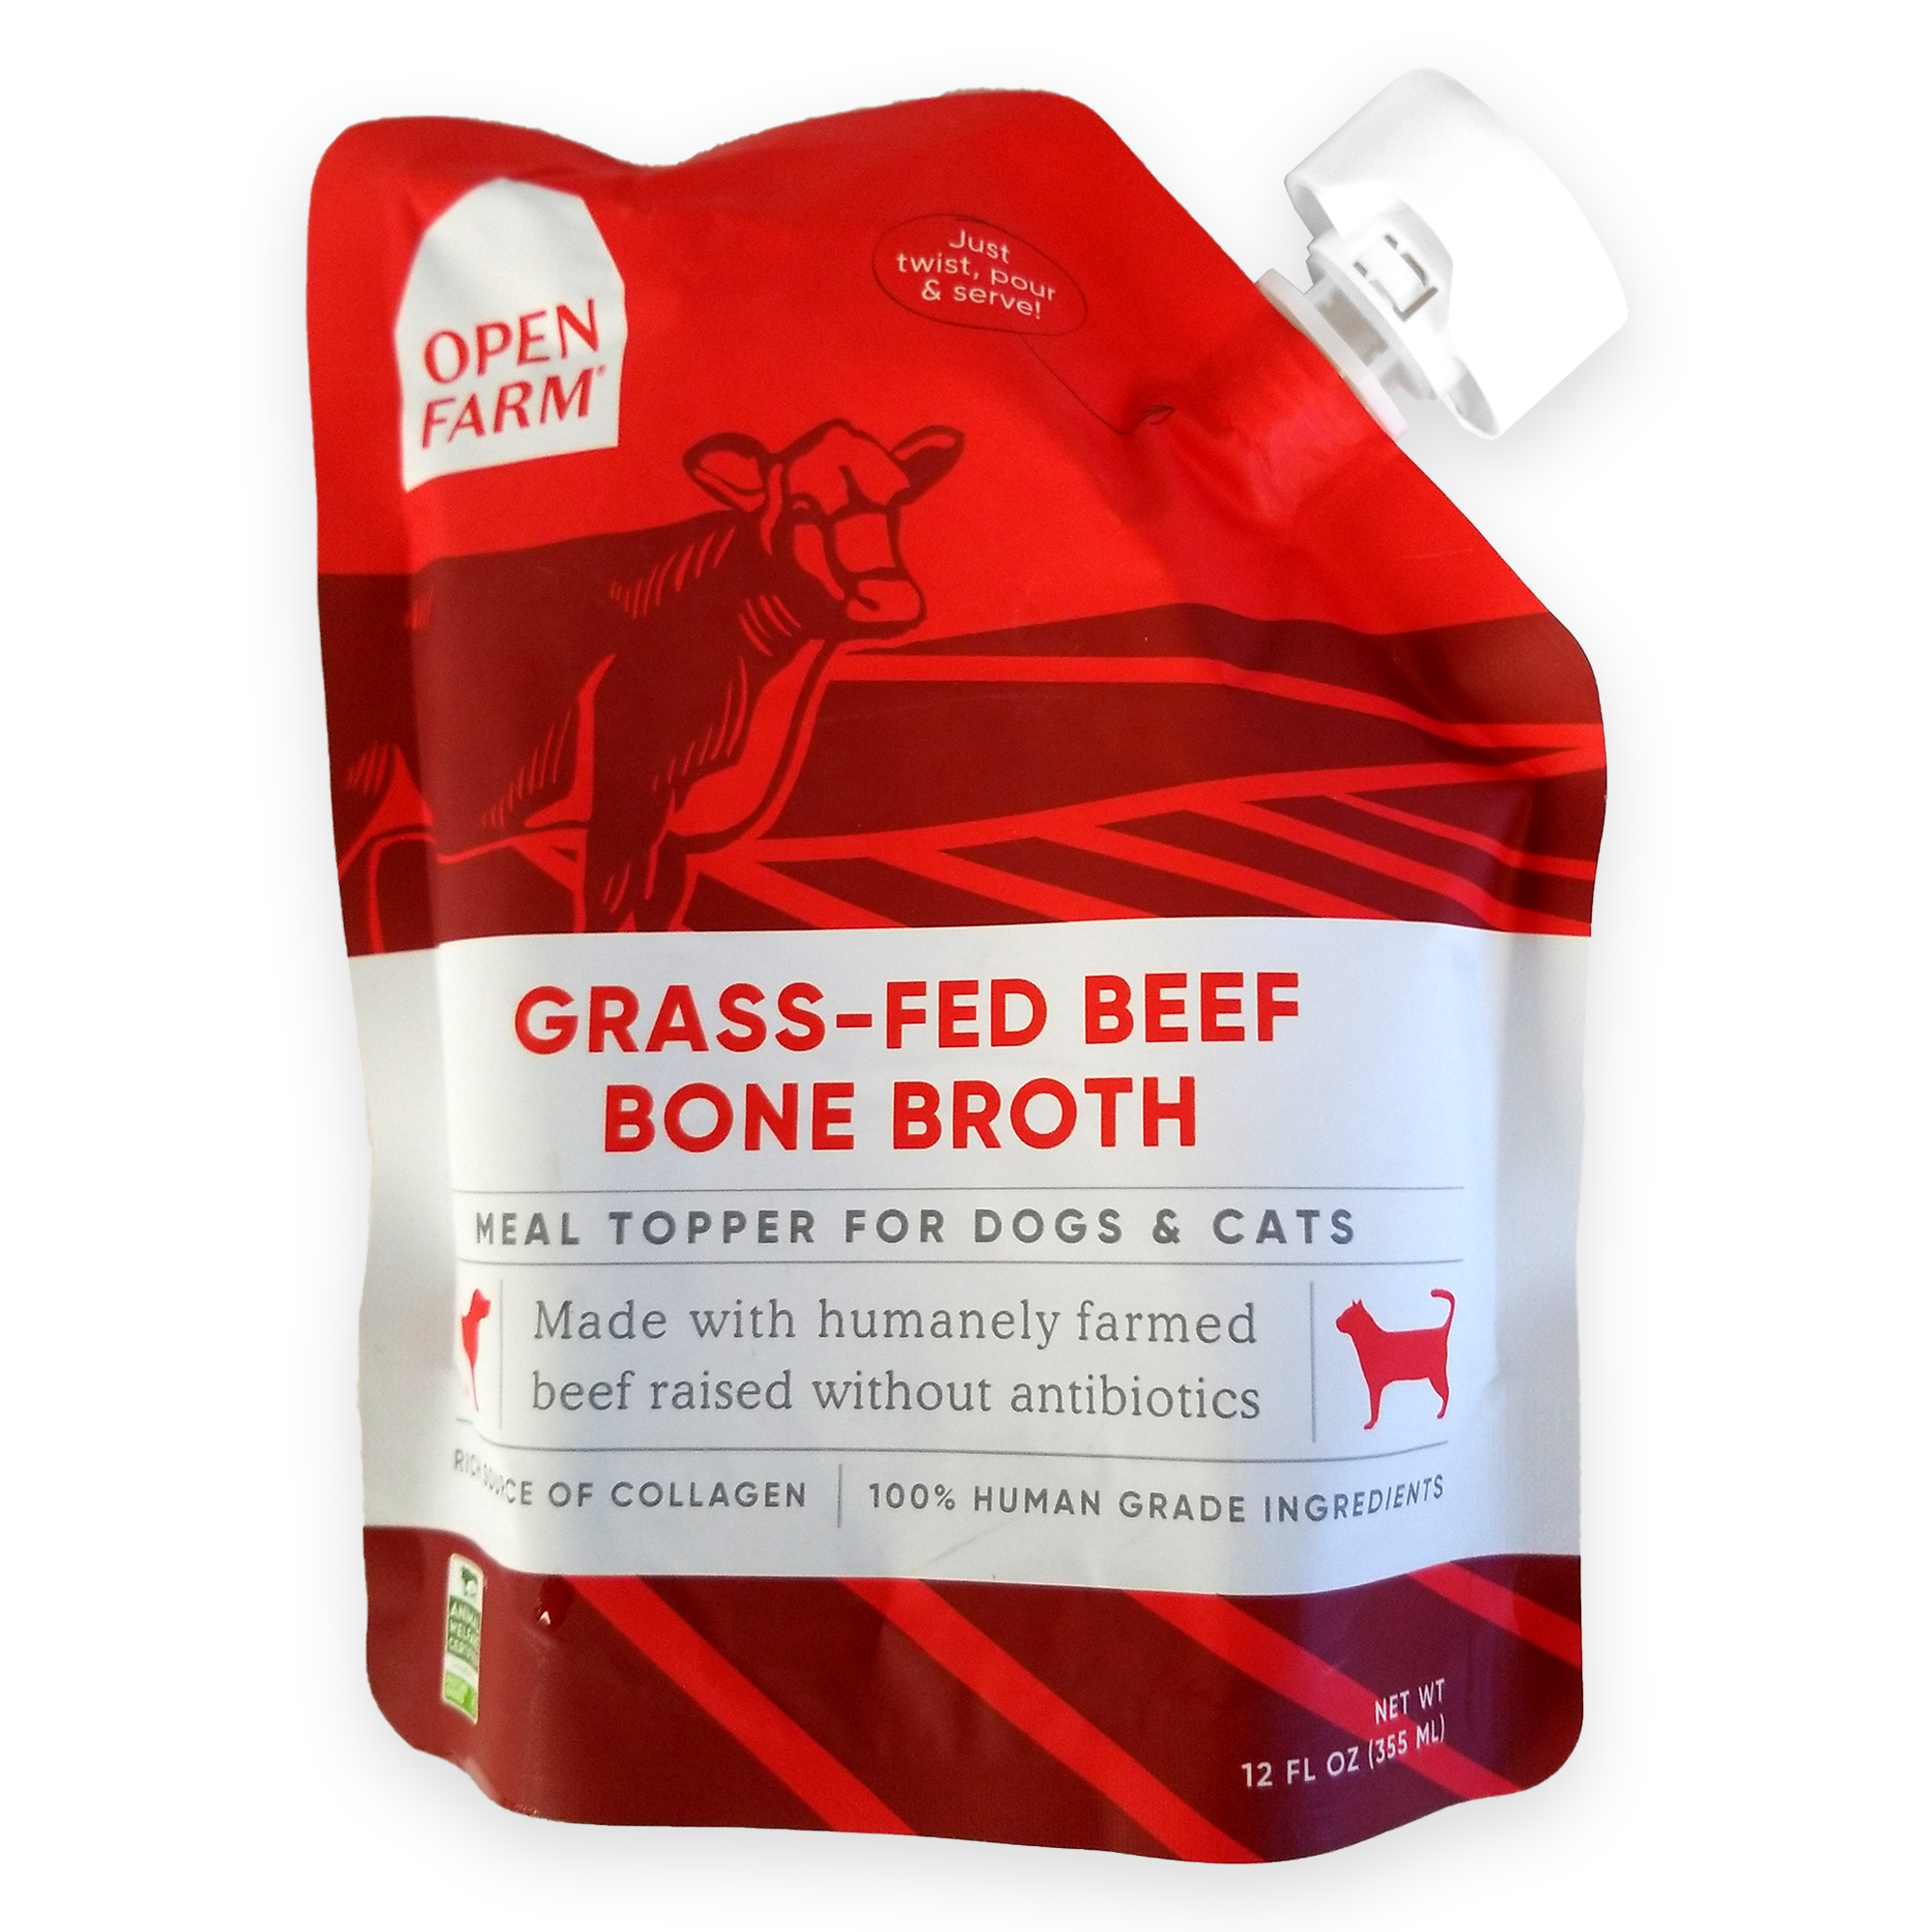 Open Farm Meal Topper for Dogs & Cats, Grass-Fed Beef Bone Broth, 12oz